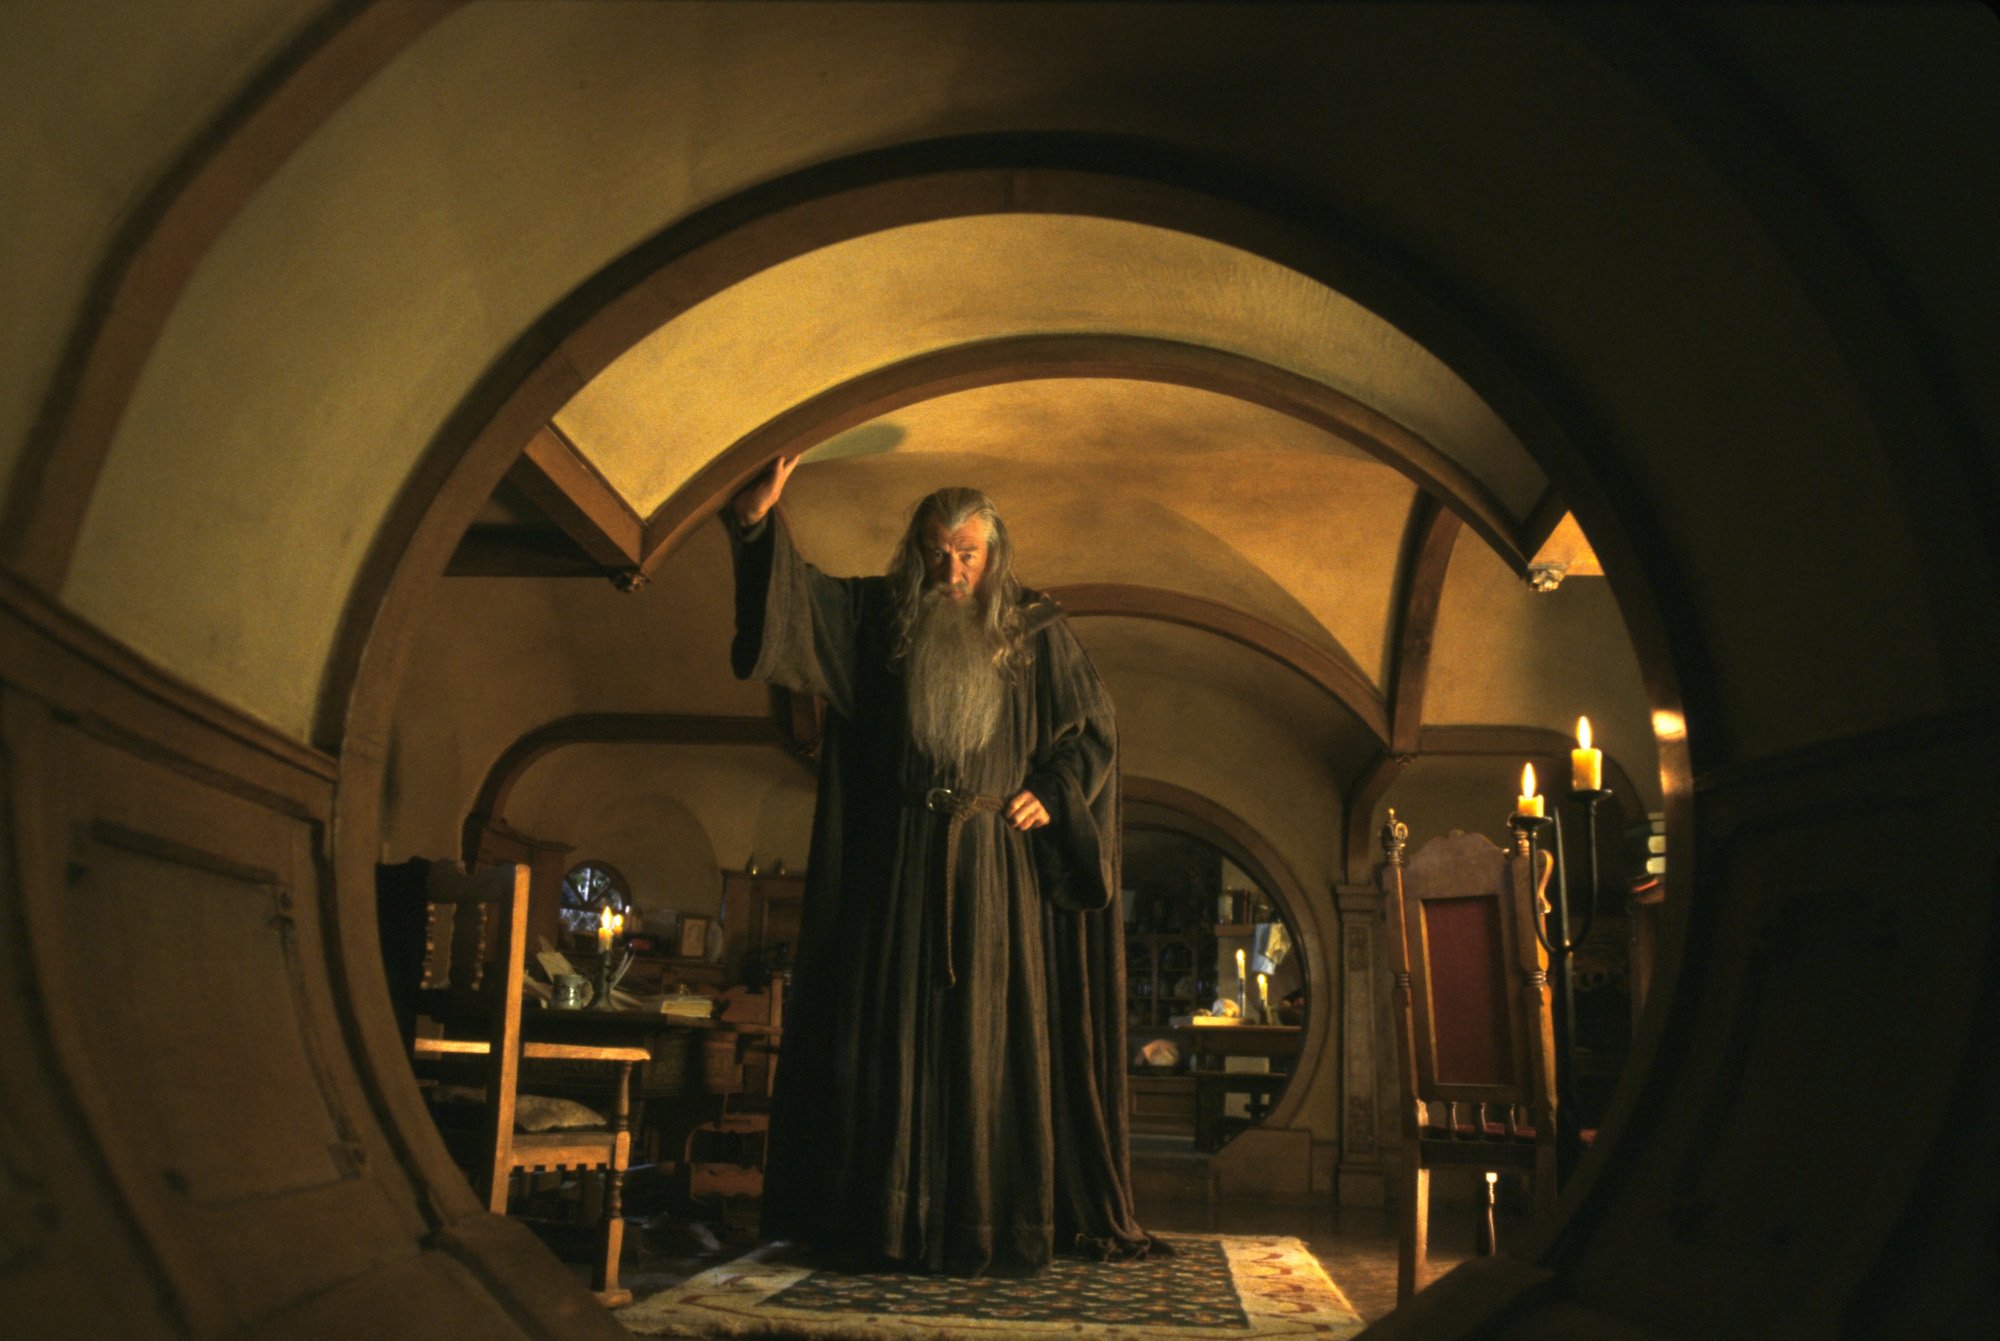 Sir Ian McKellen as Gandalf in The Lord of the Rings for our article on when he came to Middle-earth. He stands in a hobbit house and touches the ceiling.